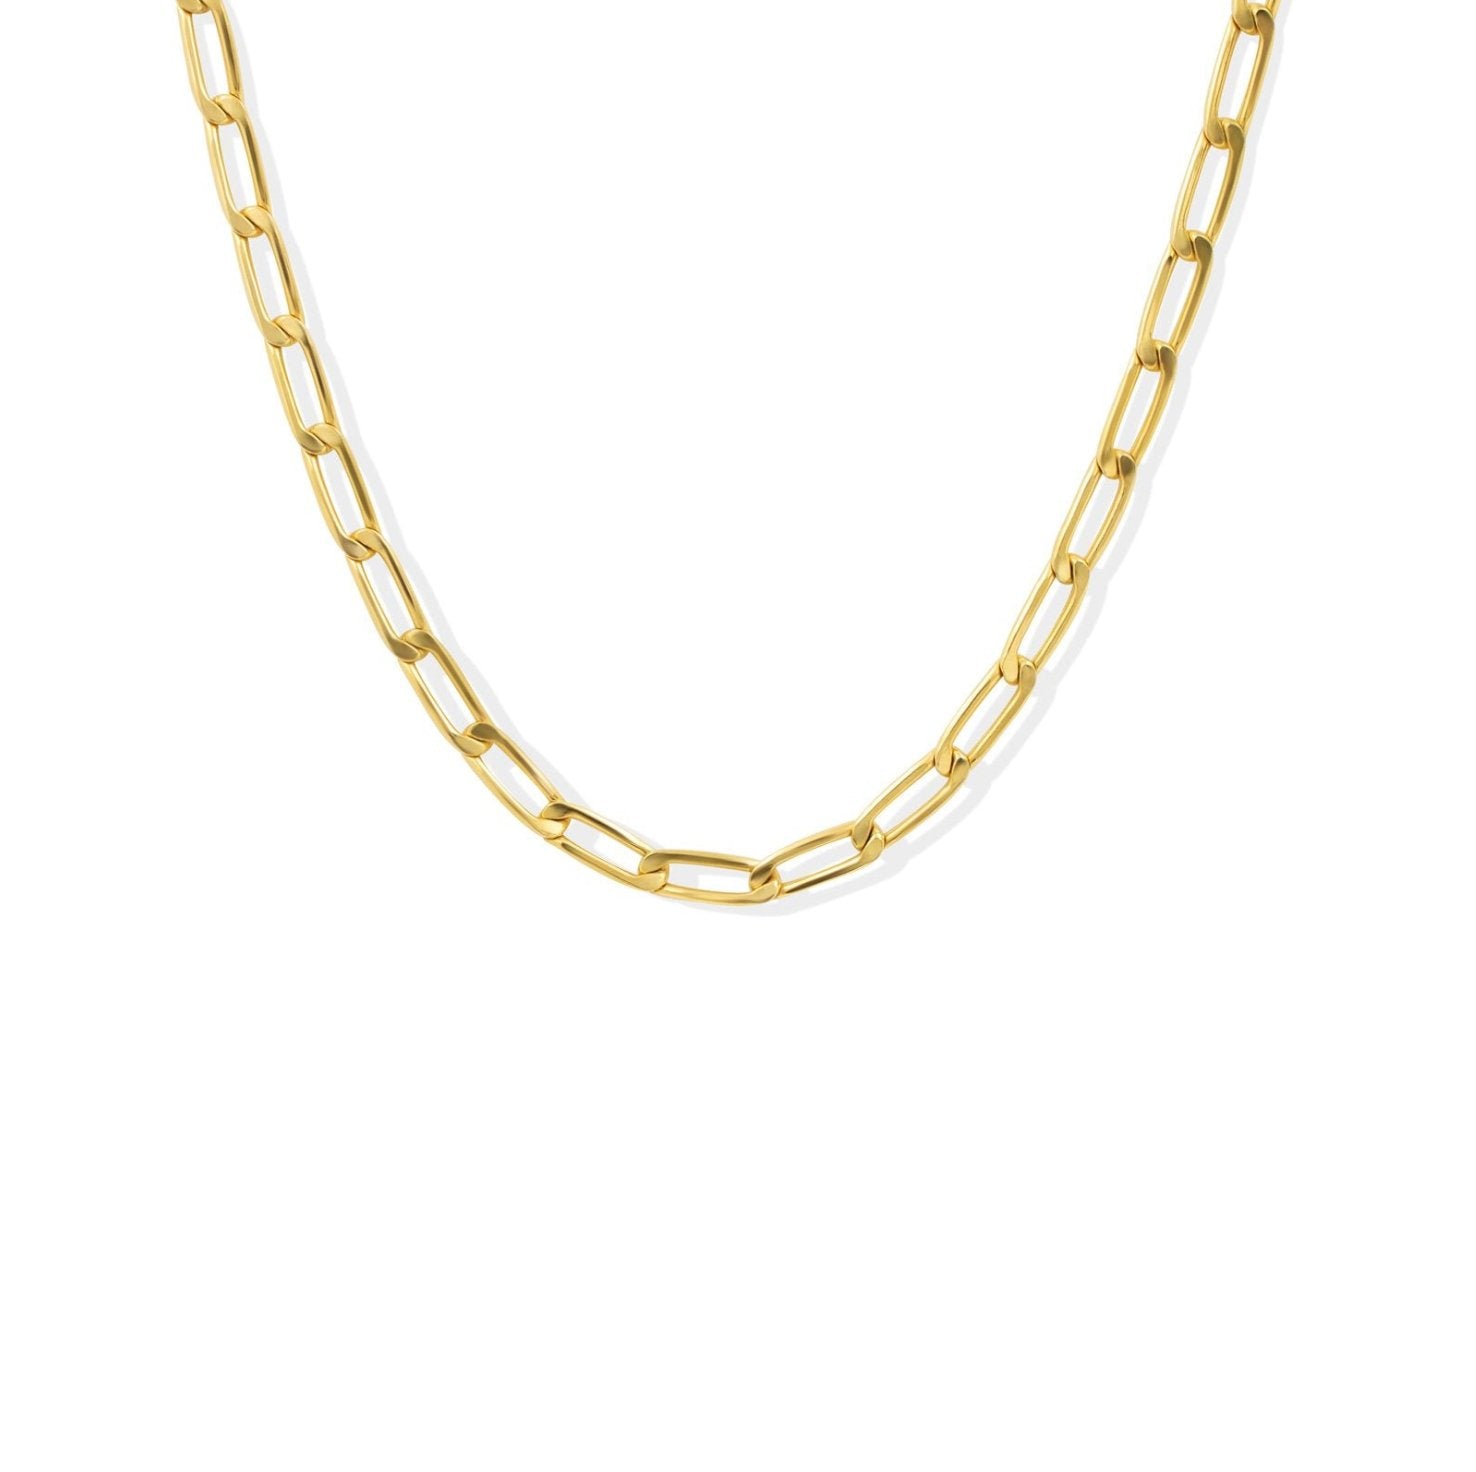 Elongated curb chain necklace on white background - Camille Jewelry